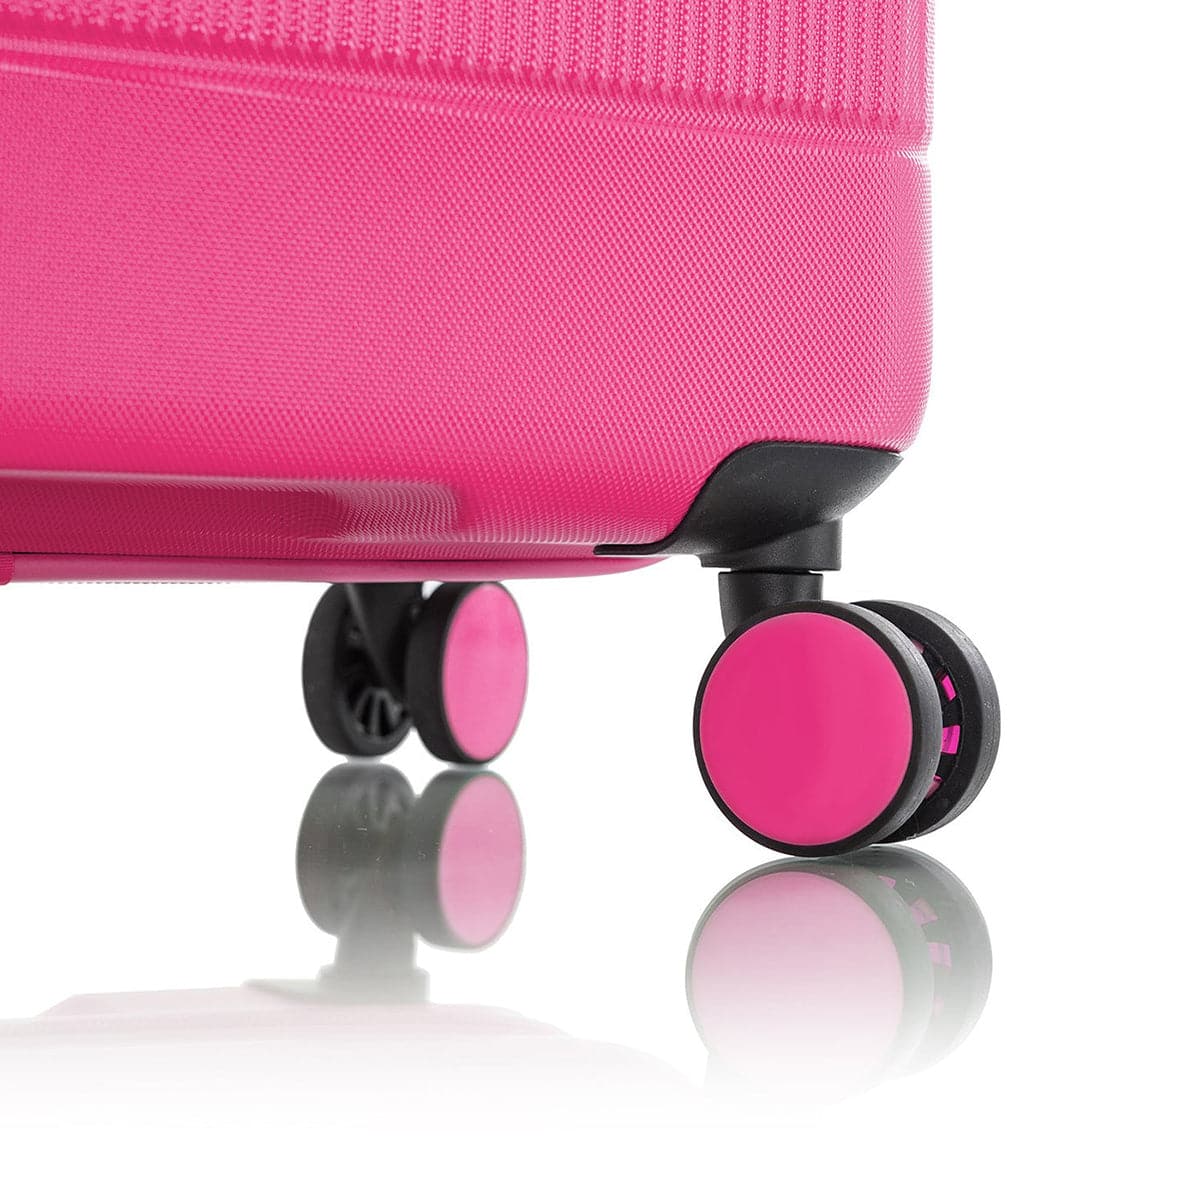 Heys Neo 21" Carry-On Spinner Luggage